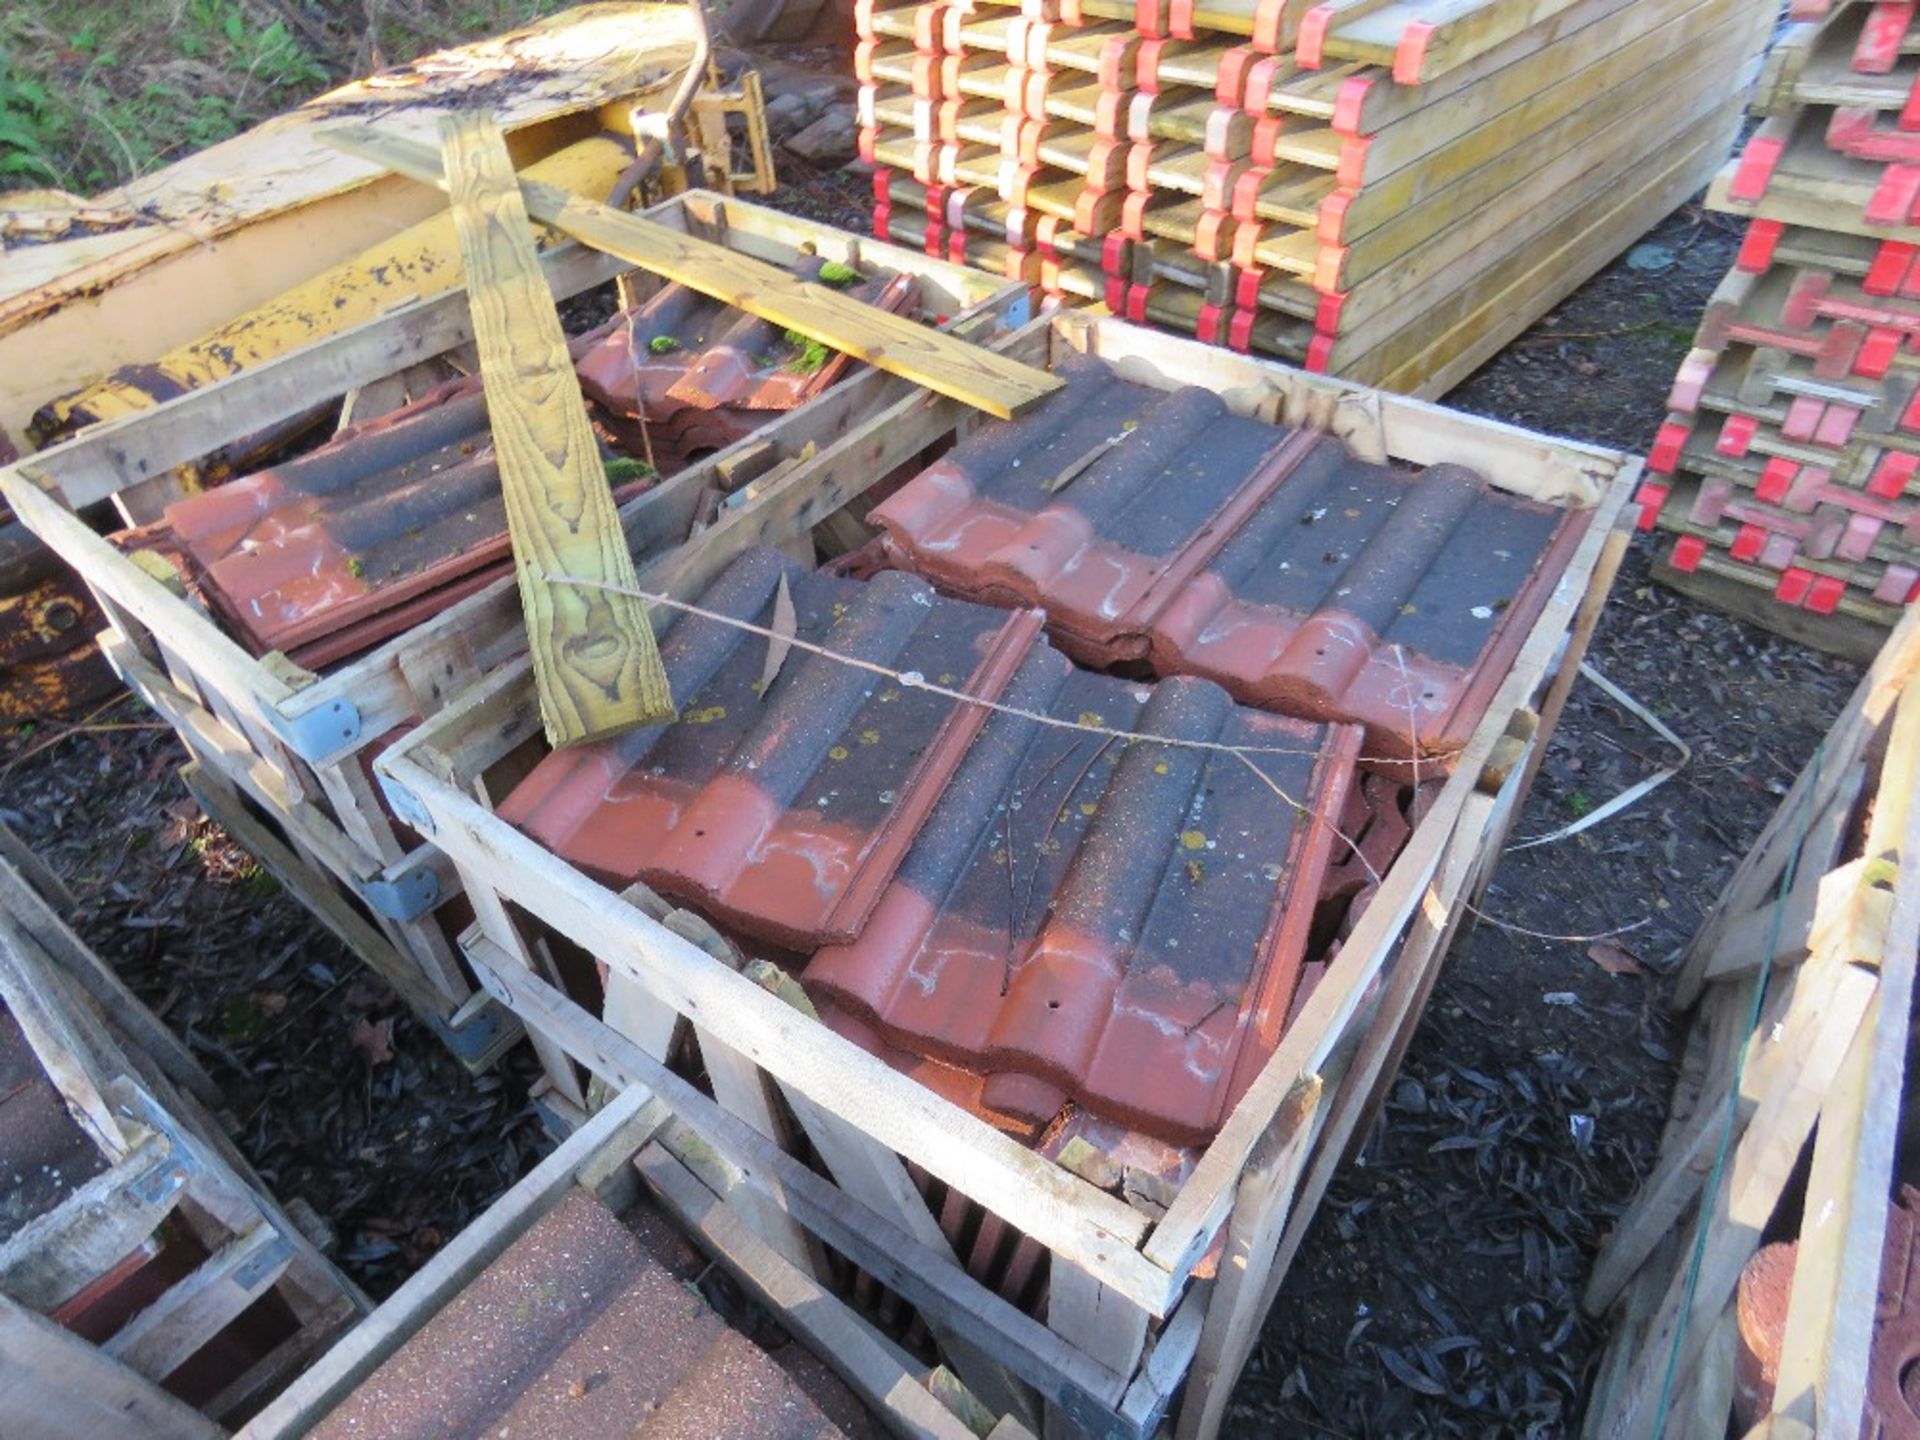 6 X STILLAGES OF REDLAND CONCRETE ROOF TILES, PRE USED. RECENTLY REMOVED FROM HOUSE BEING DEMOLISHED - Image 3 of 5